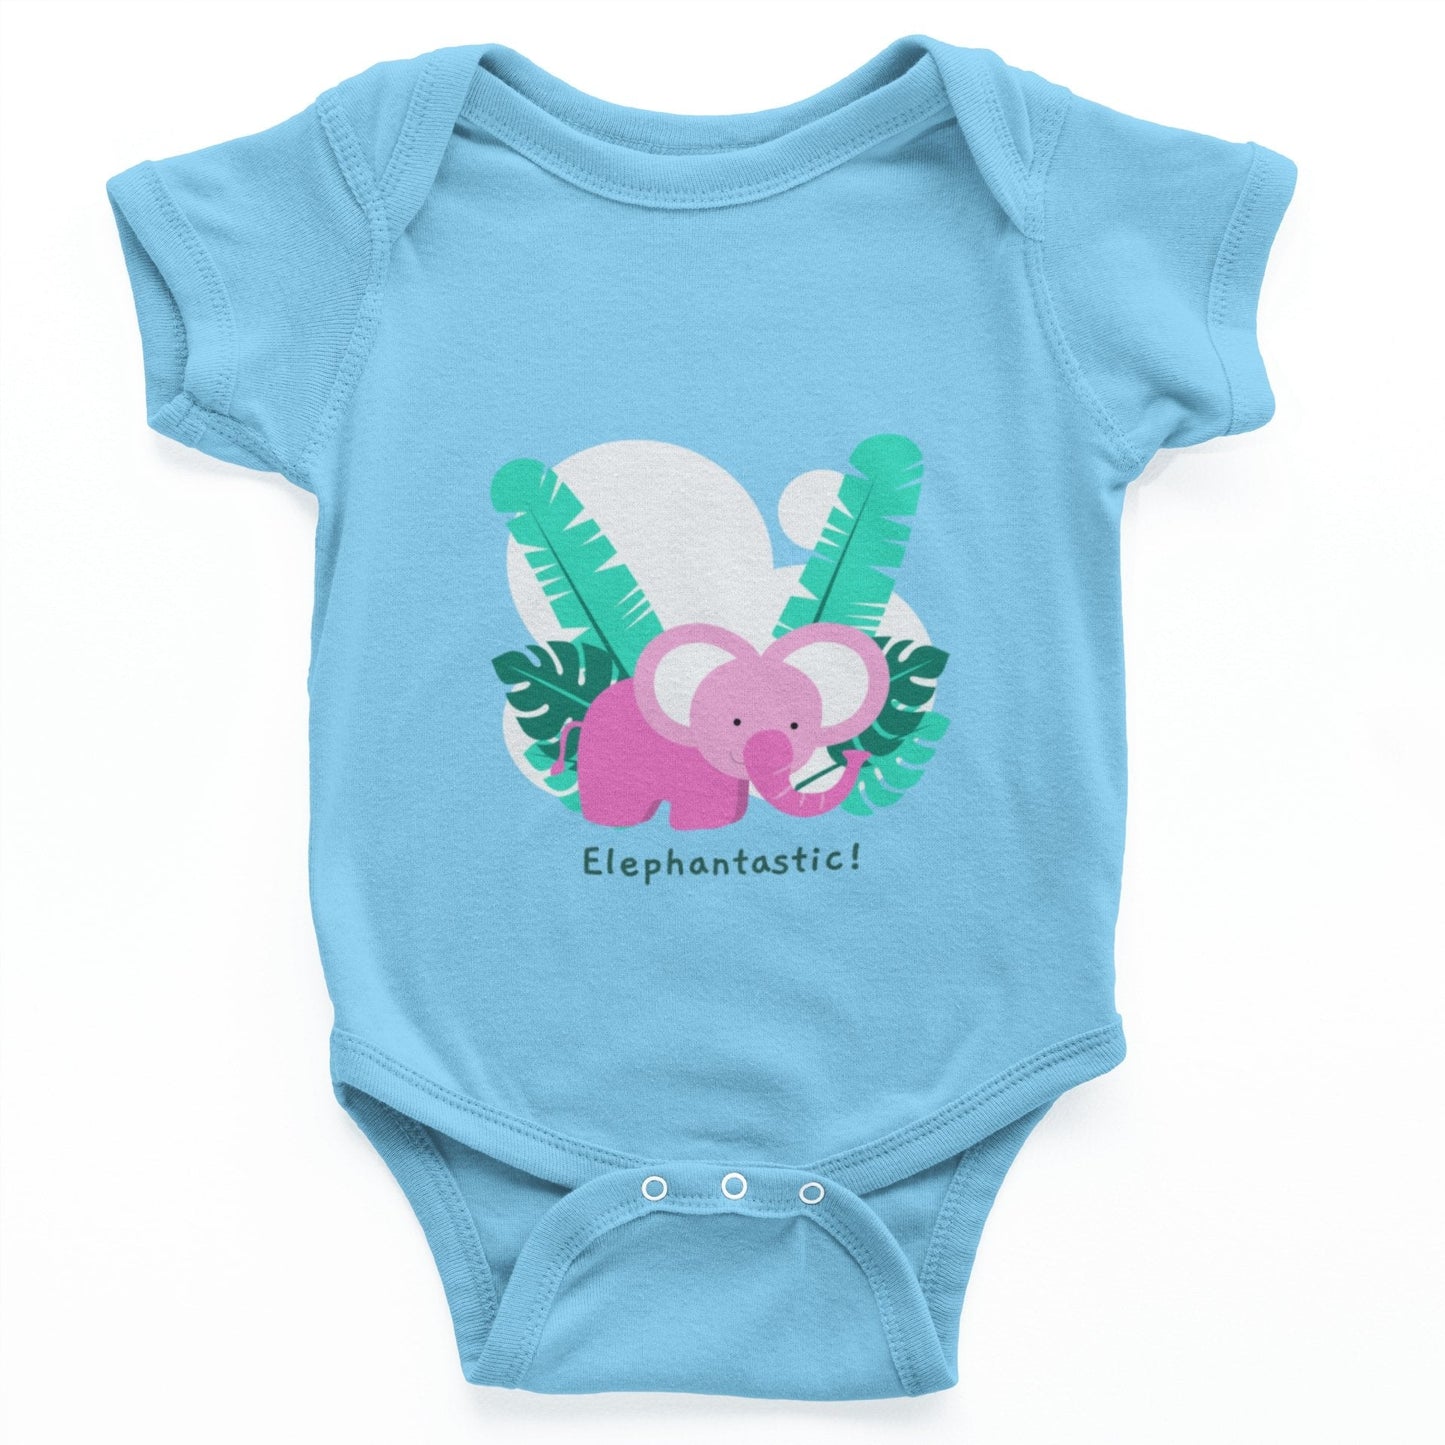 thelegalgang,Elephantastic Design Graphic Onesies for Babies,.